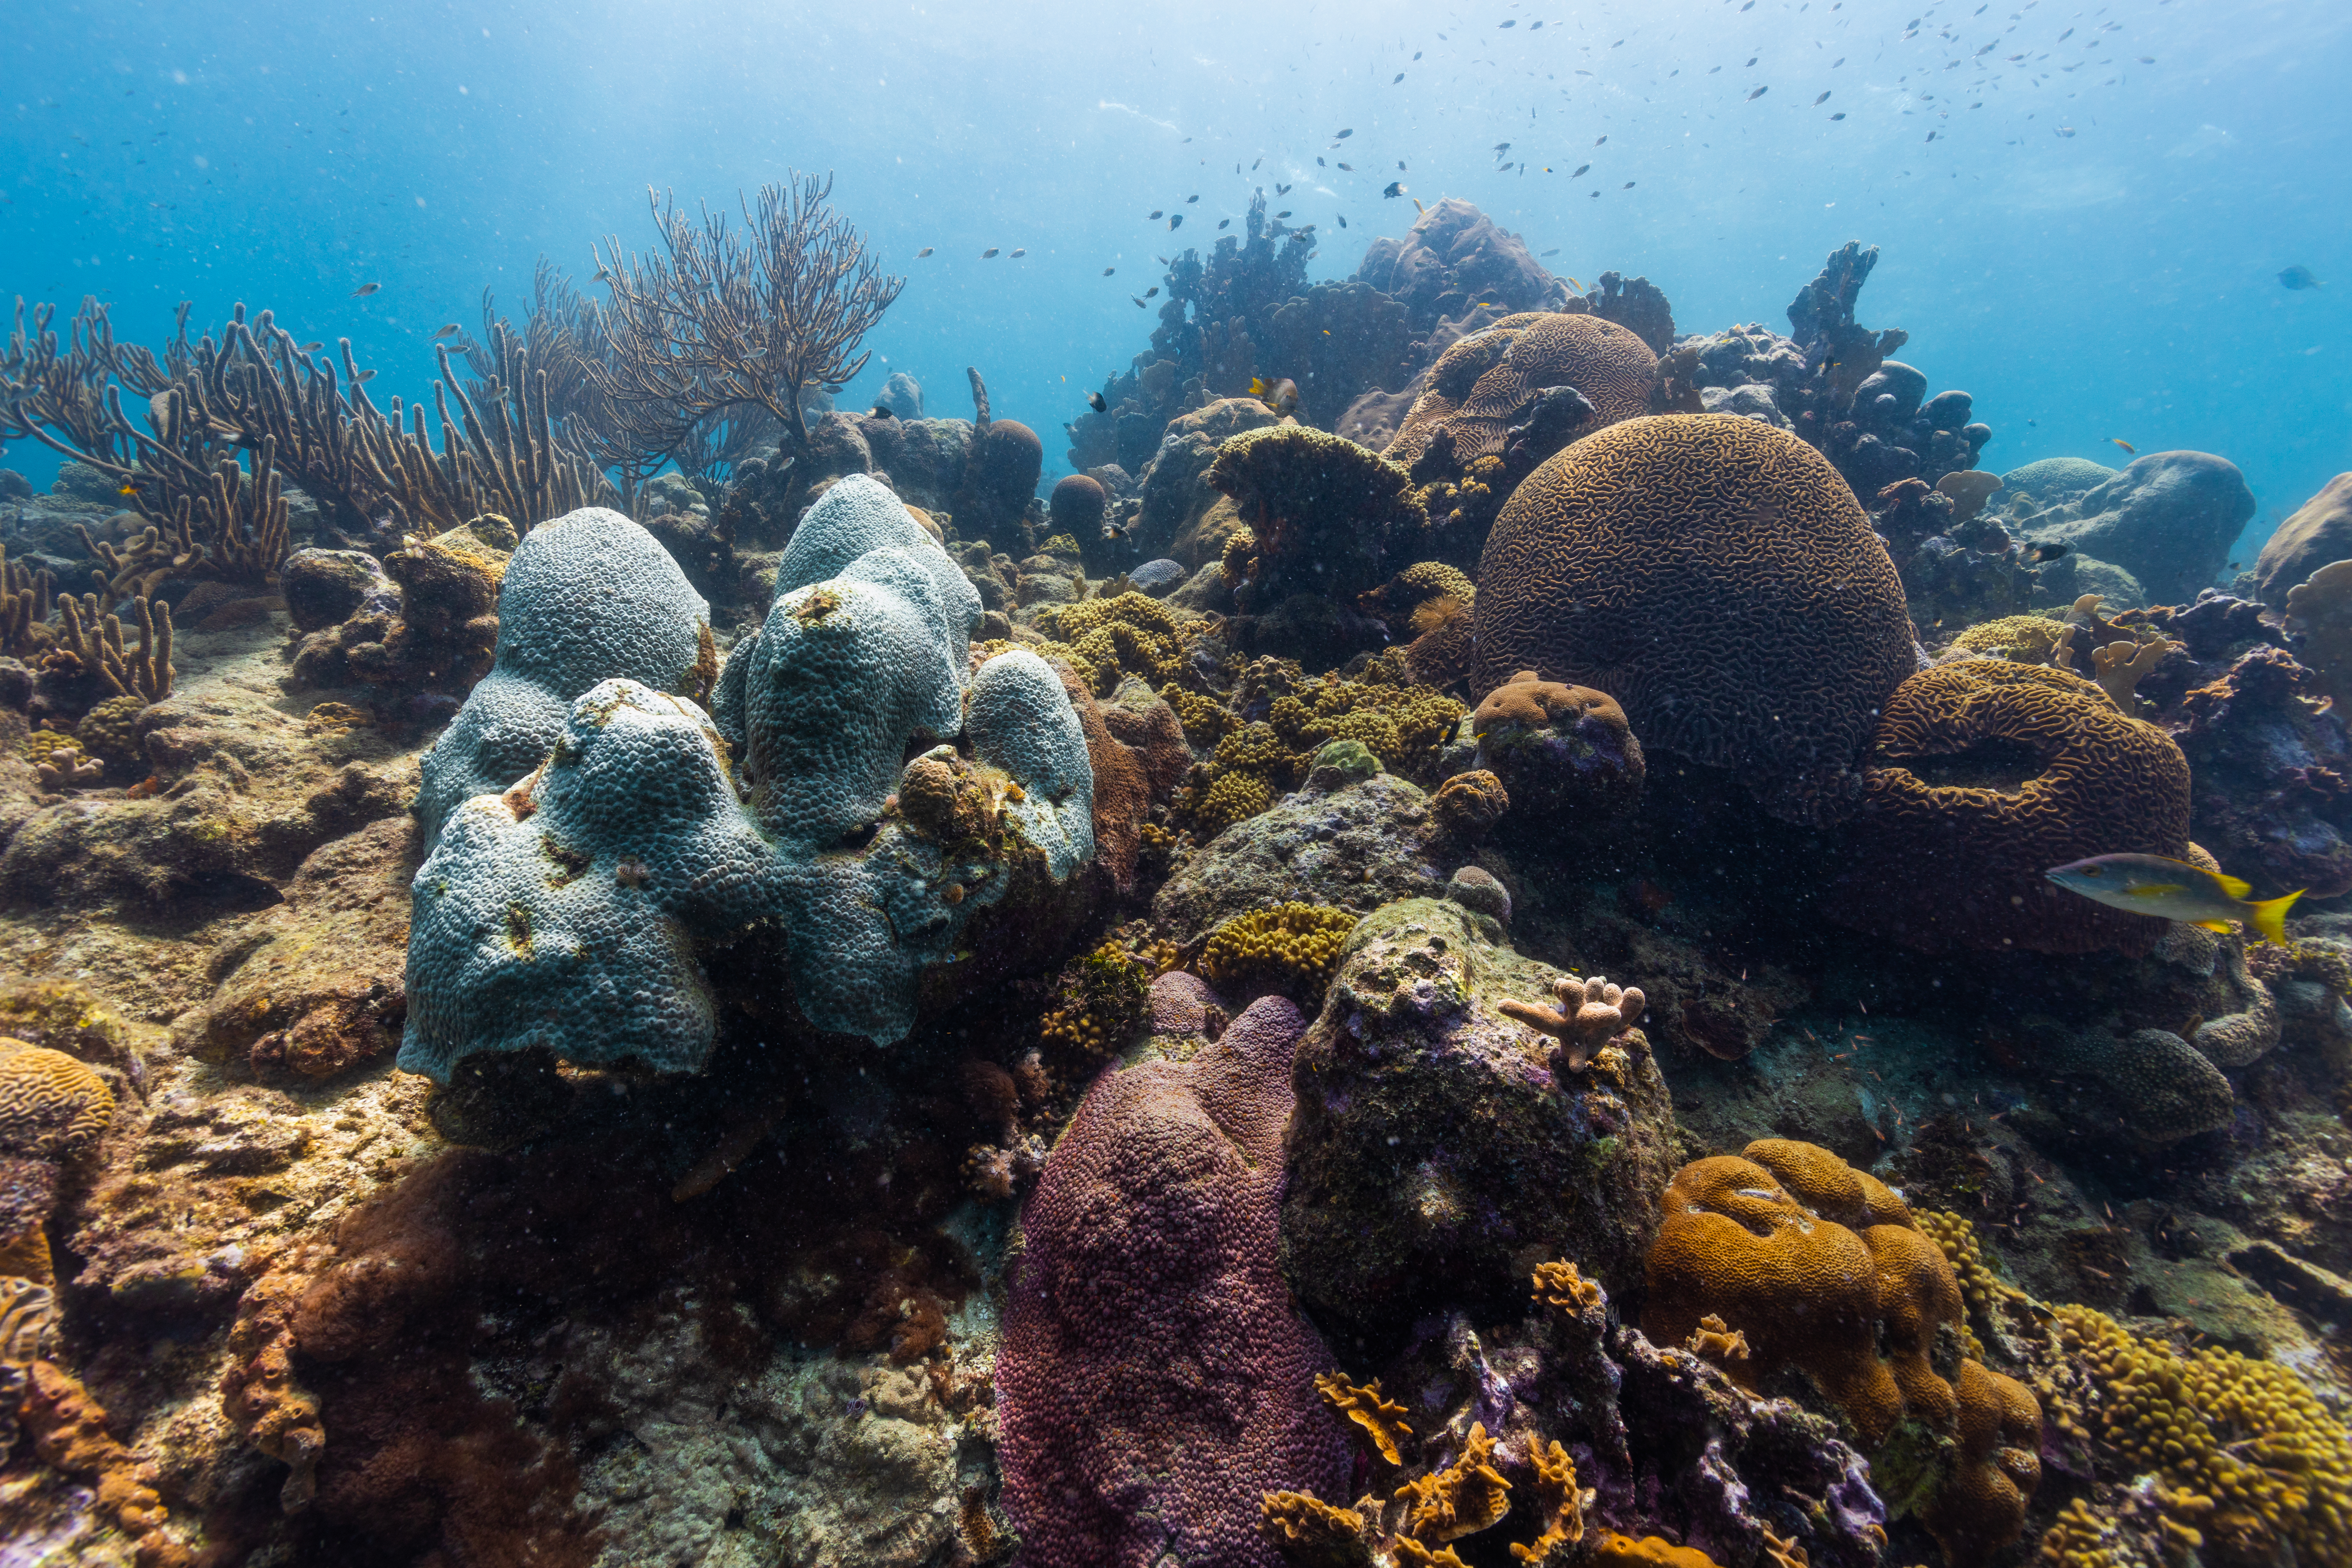 Photo of a coral reef. Fish can be seen swimming around the corals.